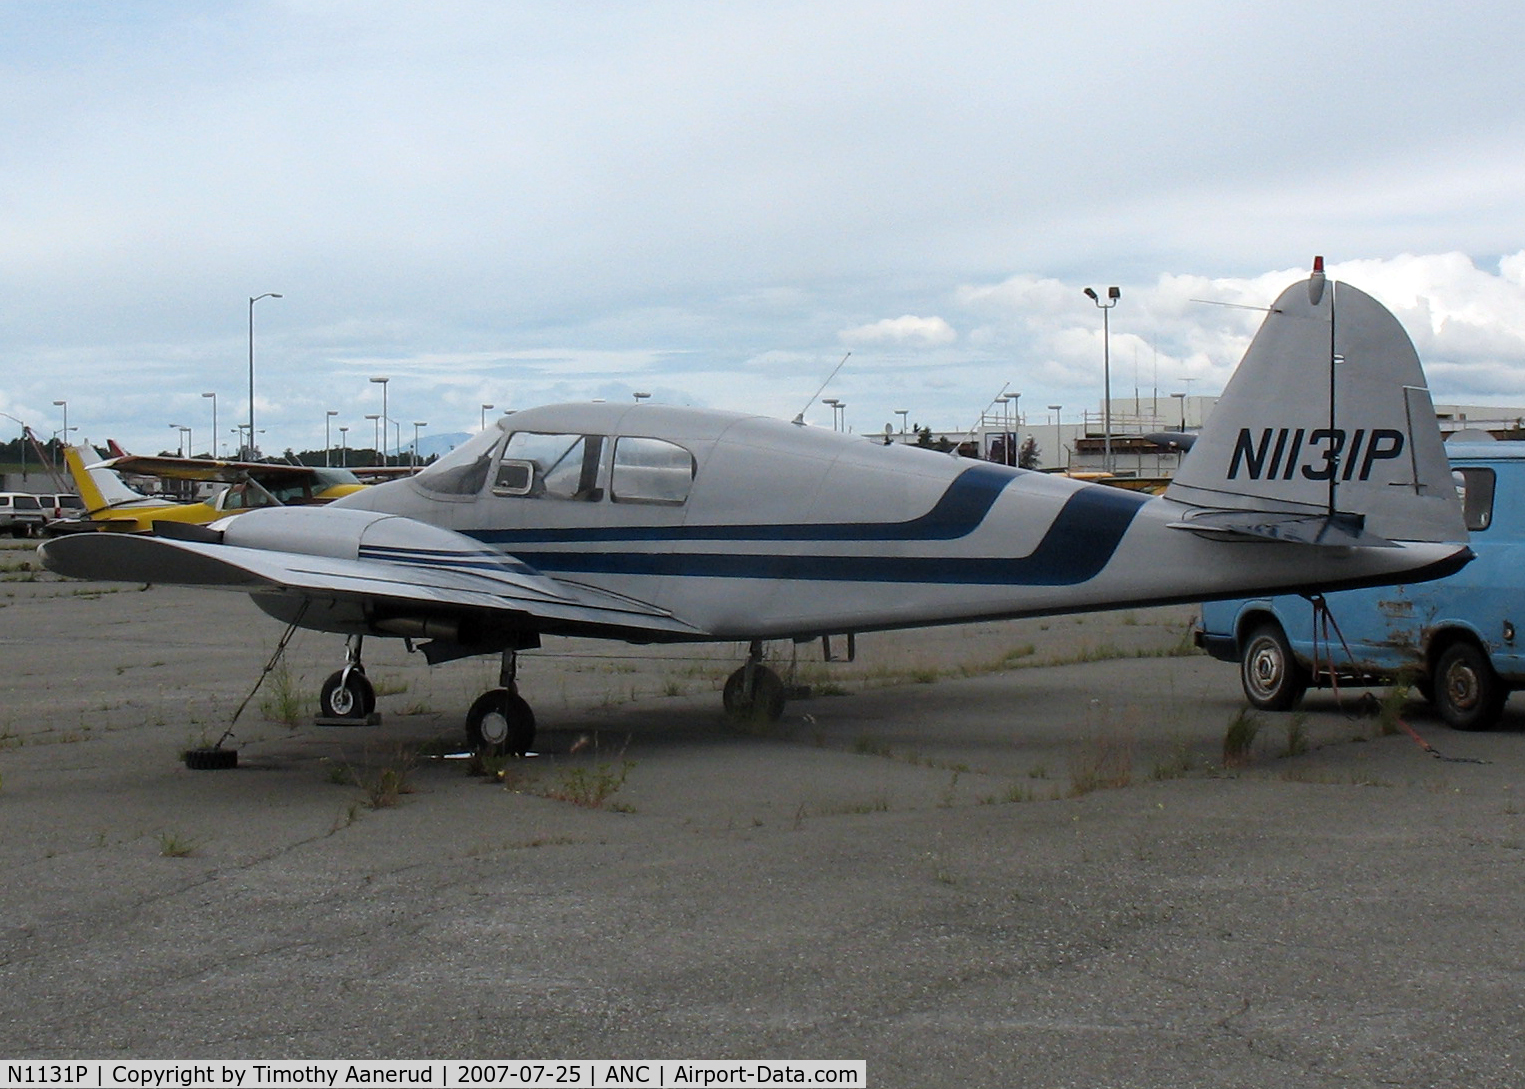 N1131P, 1955 Piper PA-23 Aztec C/N 23-141, General Aviation Parking area at Anchorage International